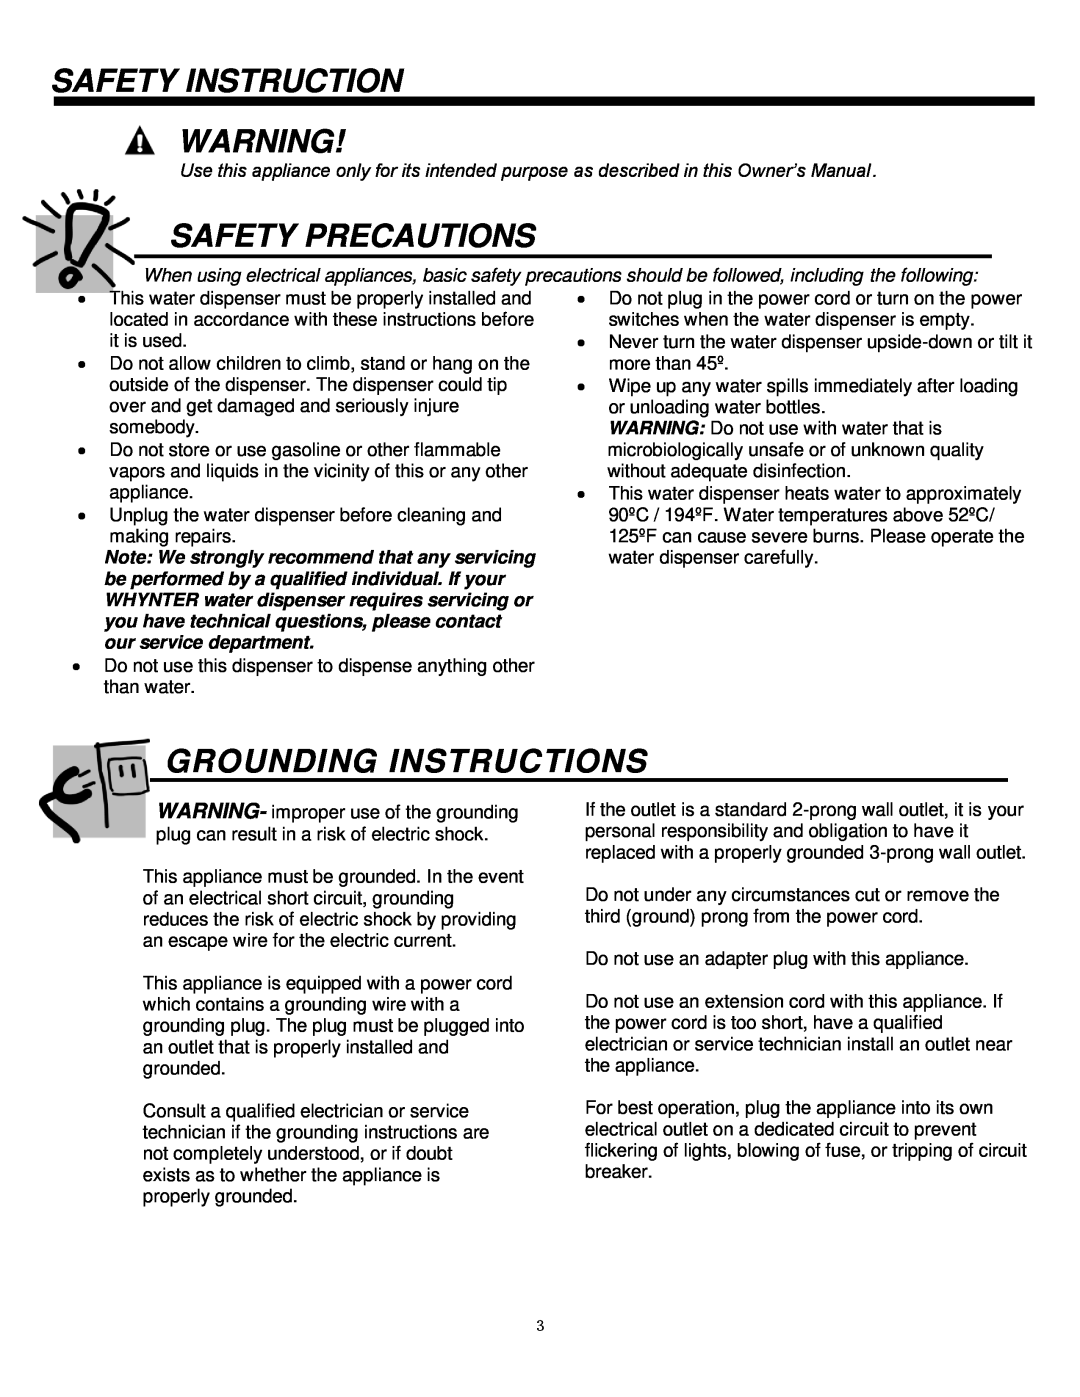 Whynter FX-7SB/W instruction manual Safety Instruction, Safety Precautions, Grounding Instructions, our service department 